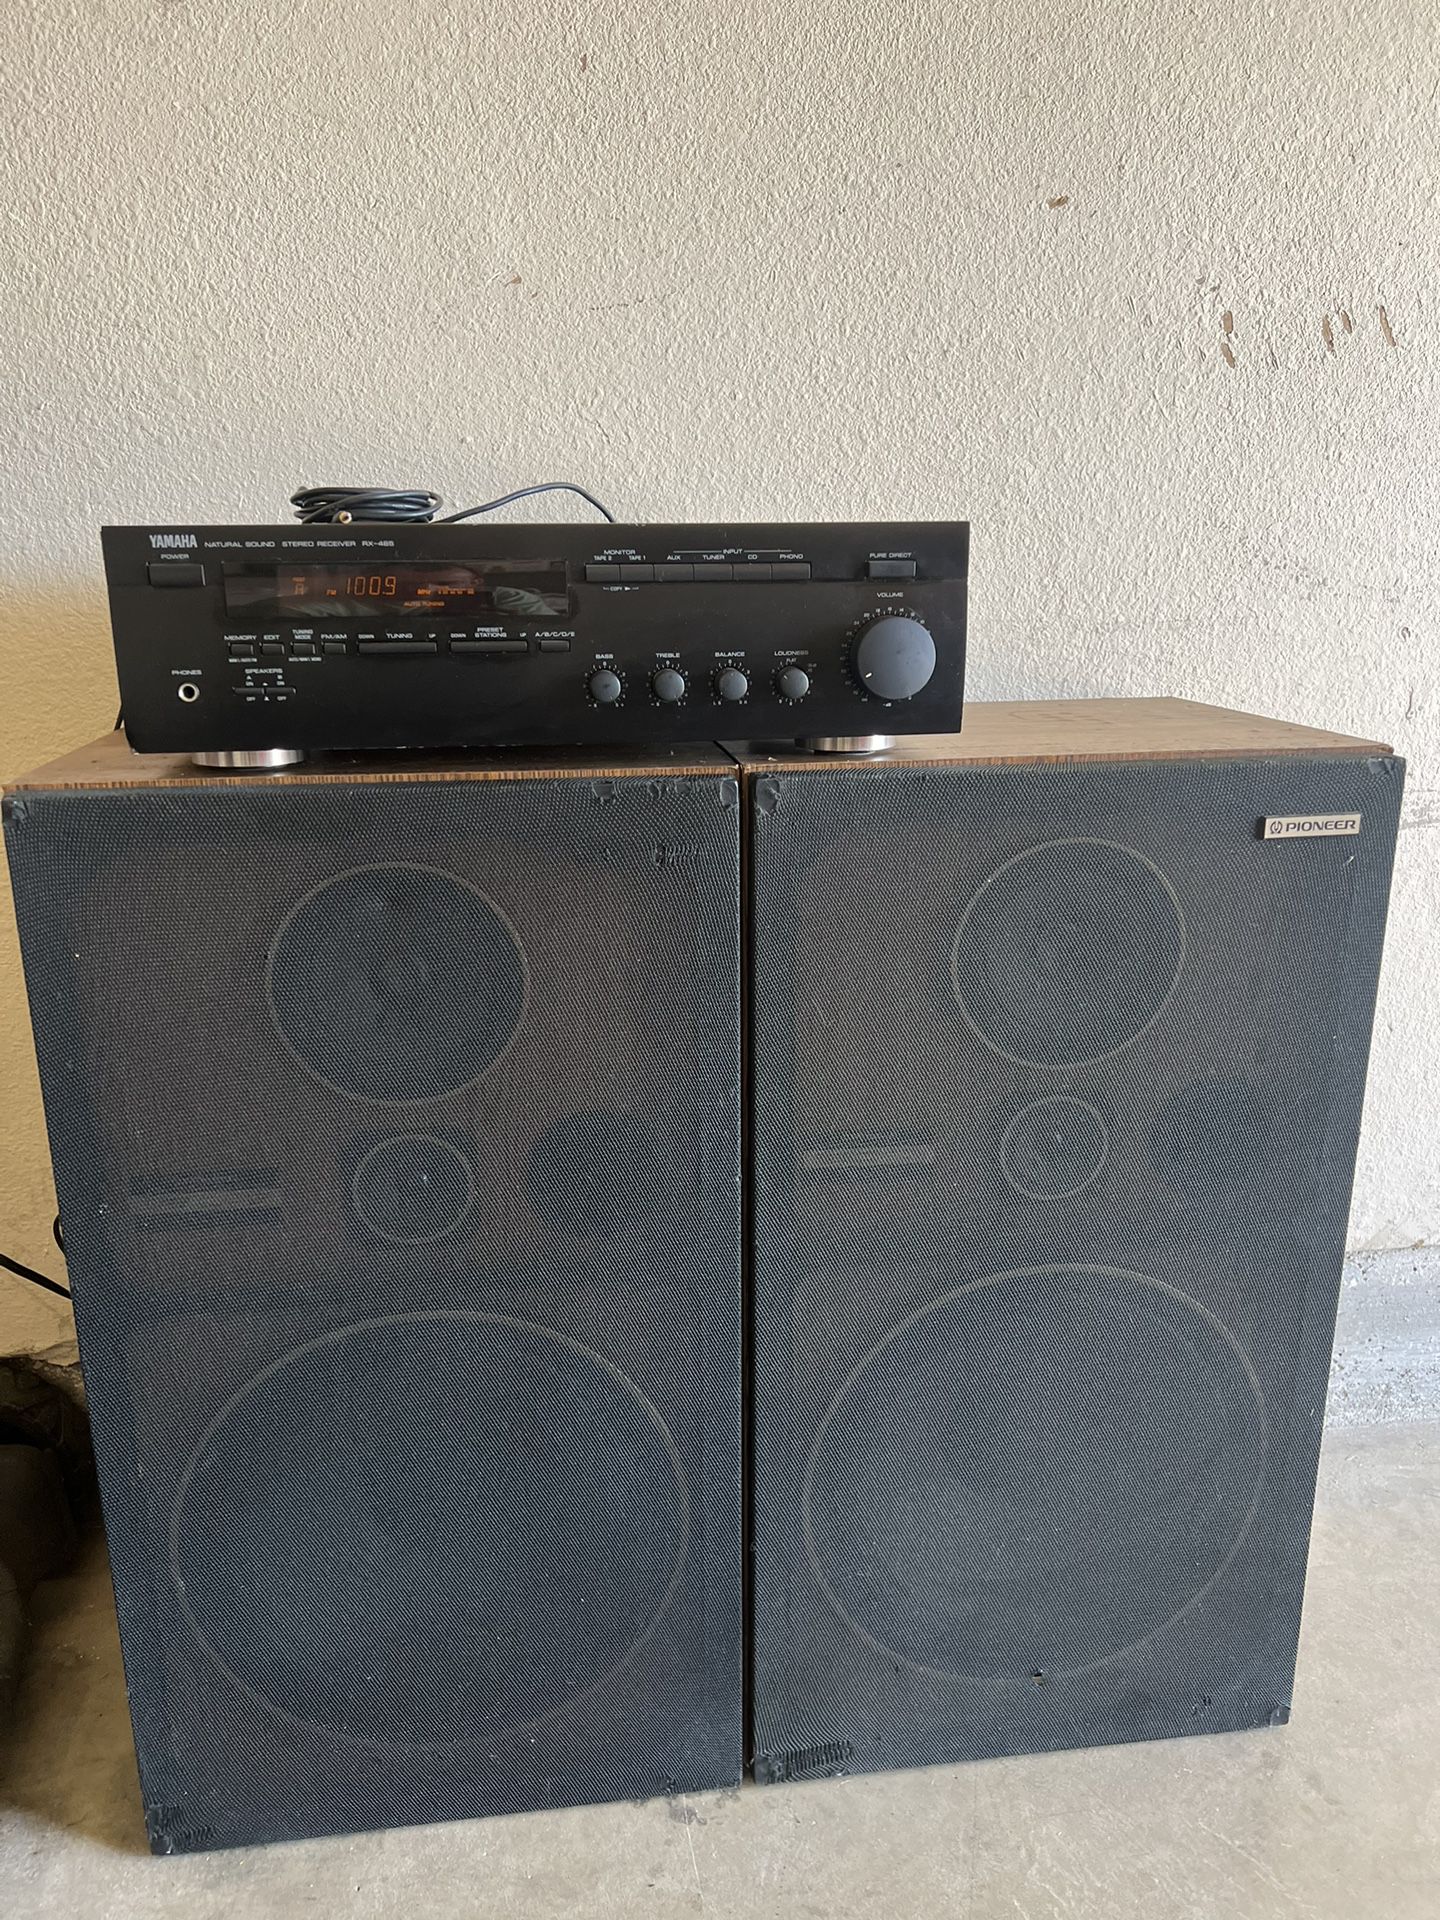 Yamaha Stereo Receiver And Pioneer Speakers 